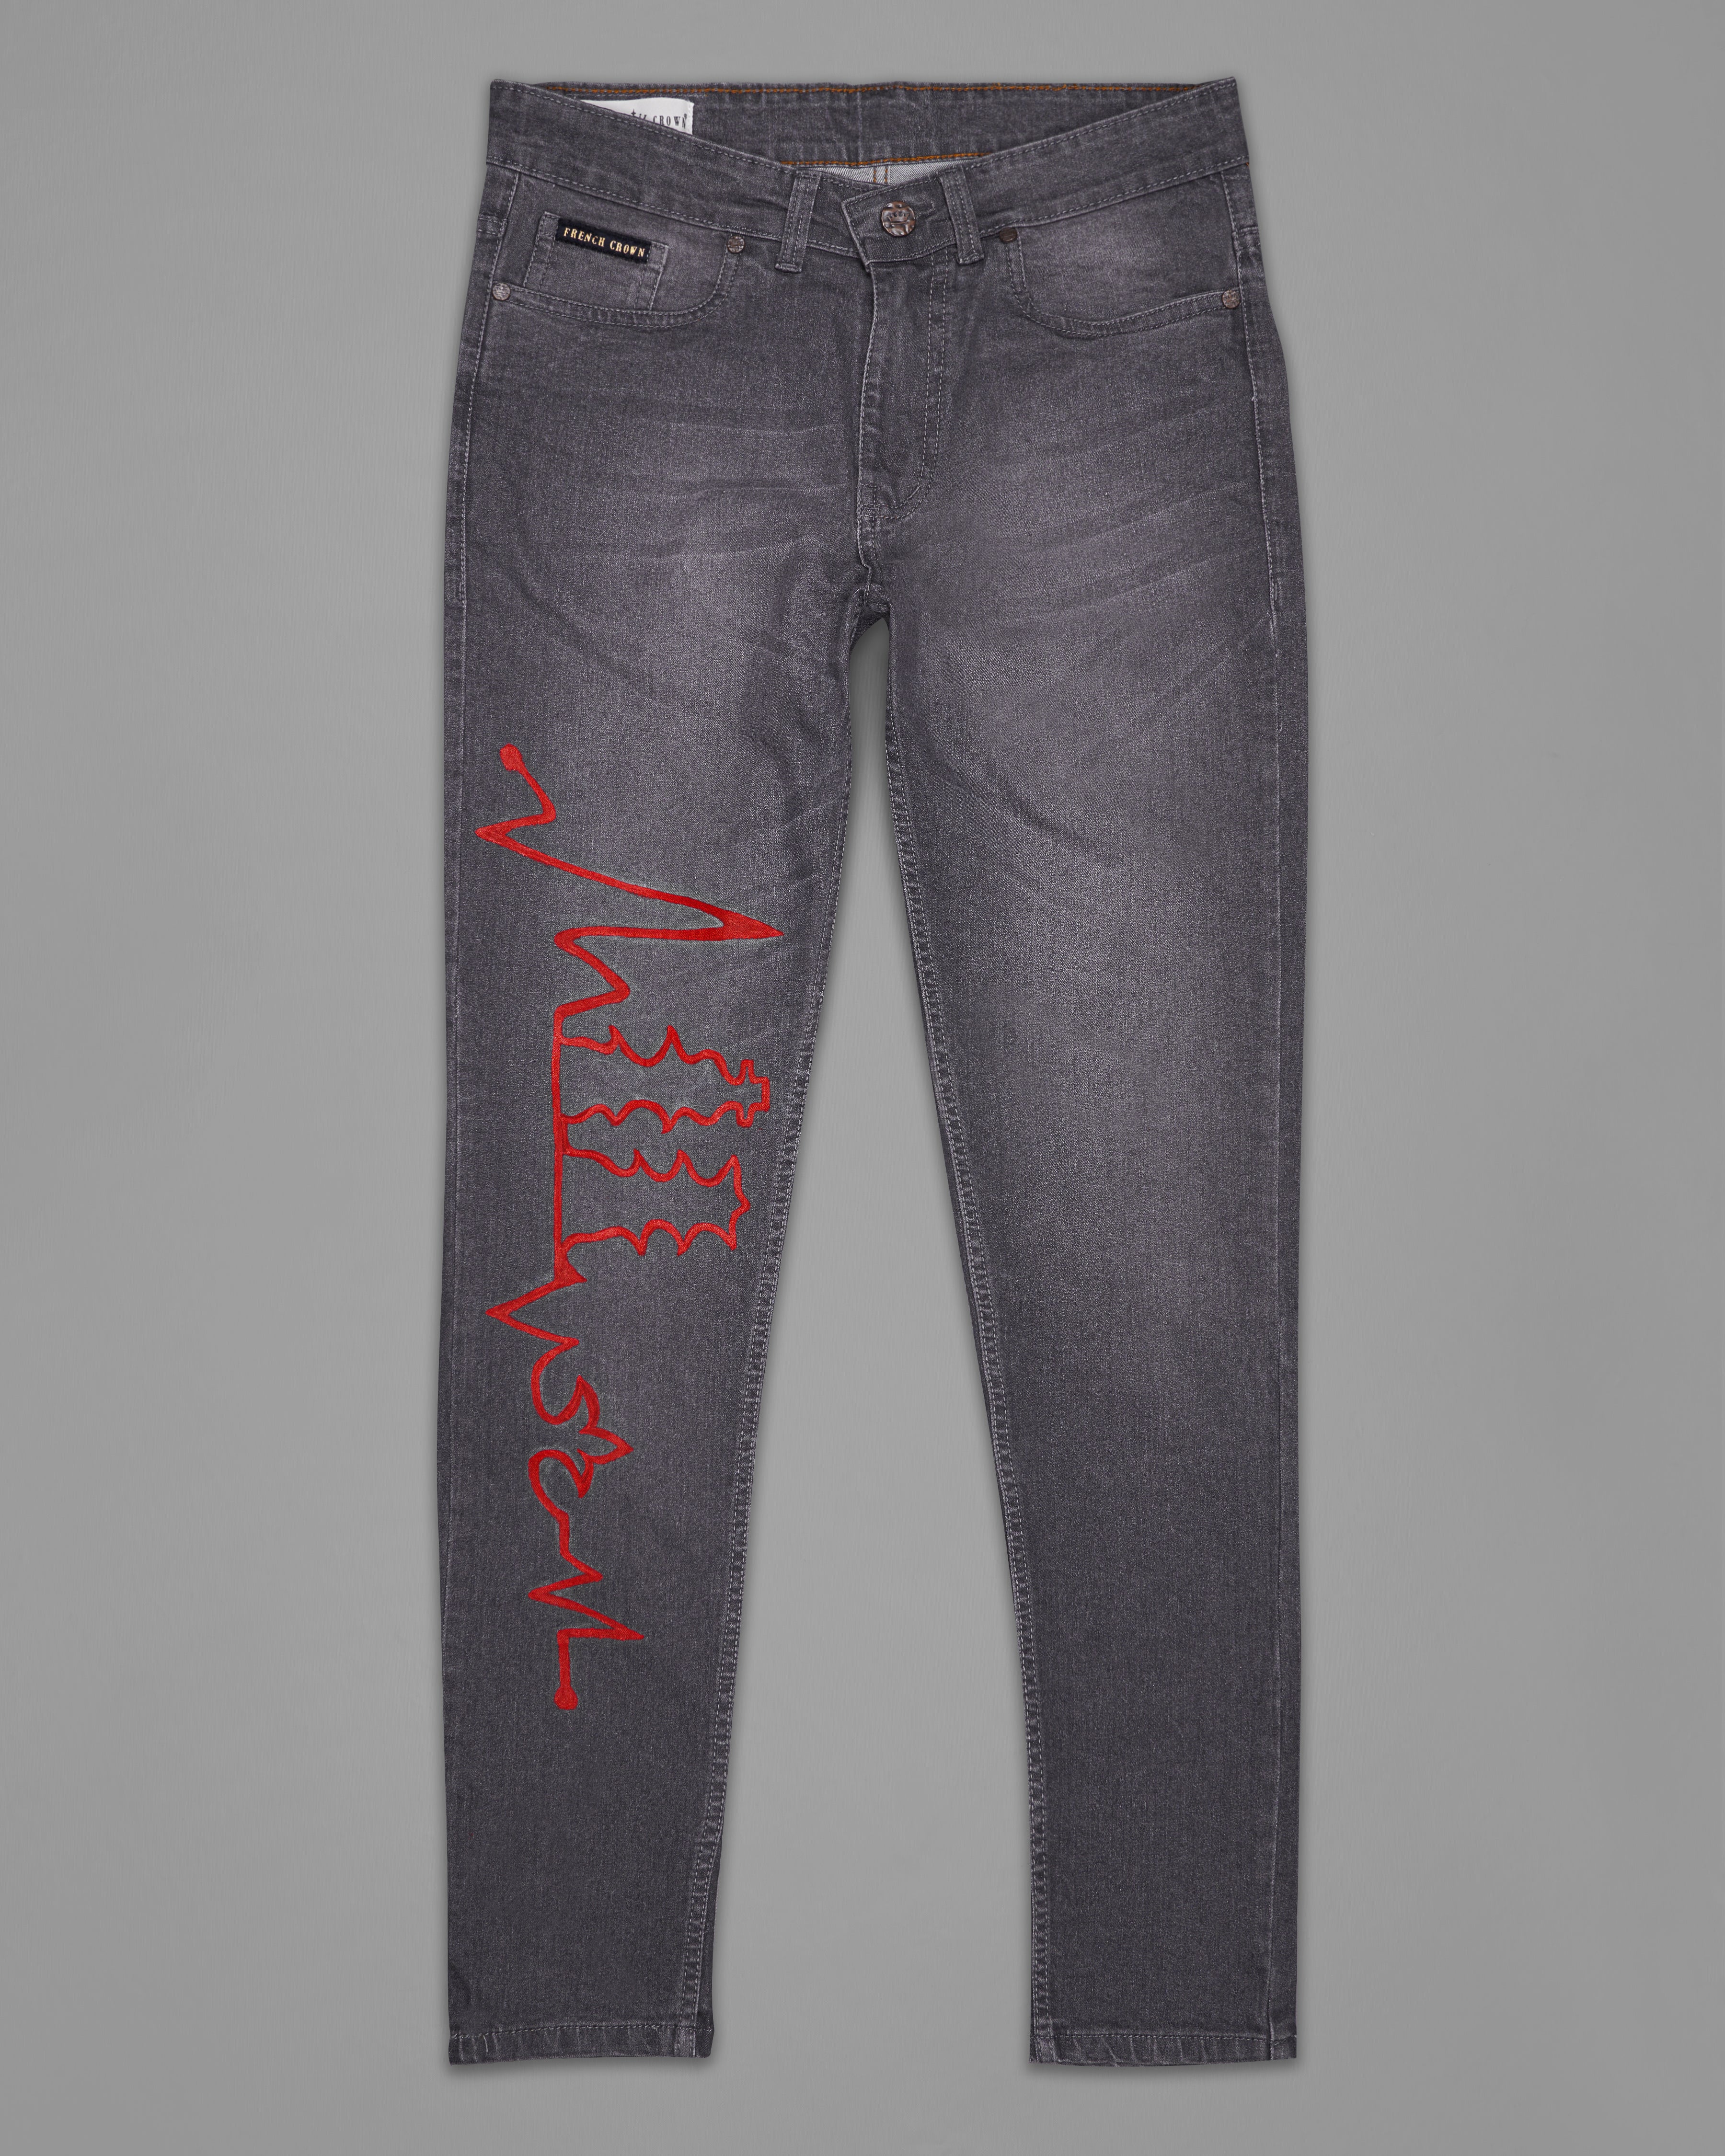 Wenge Gray Hand Painted Whiskering Washed Stretchable Denim J091-ART-32, J091-ART-34, J091-ART-36, J091-ART-38, J091-ART-40